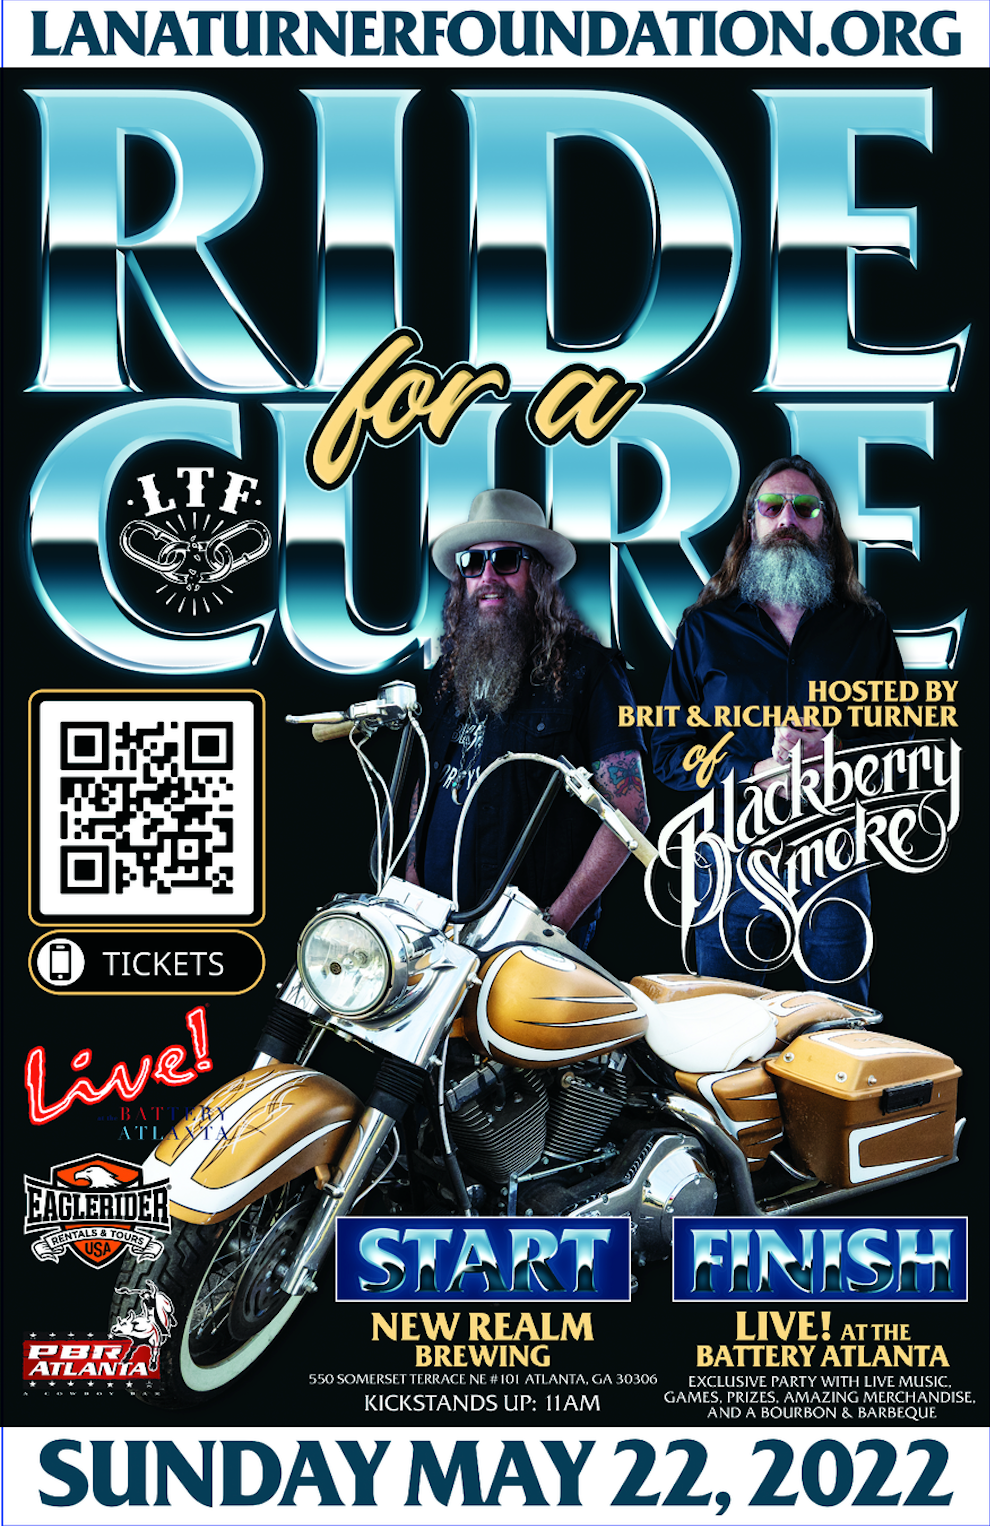 LTF CHARITY RIDE FOR A CURE MAY 22, 2022 IN ATLANTA